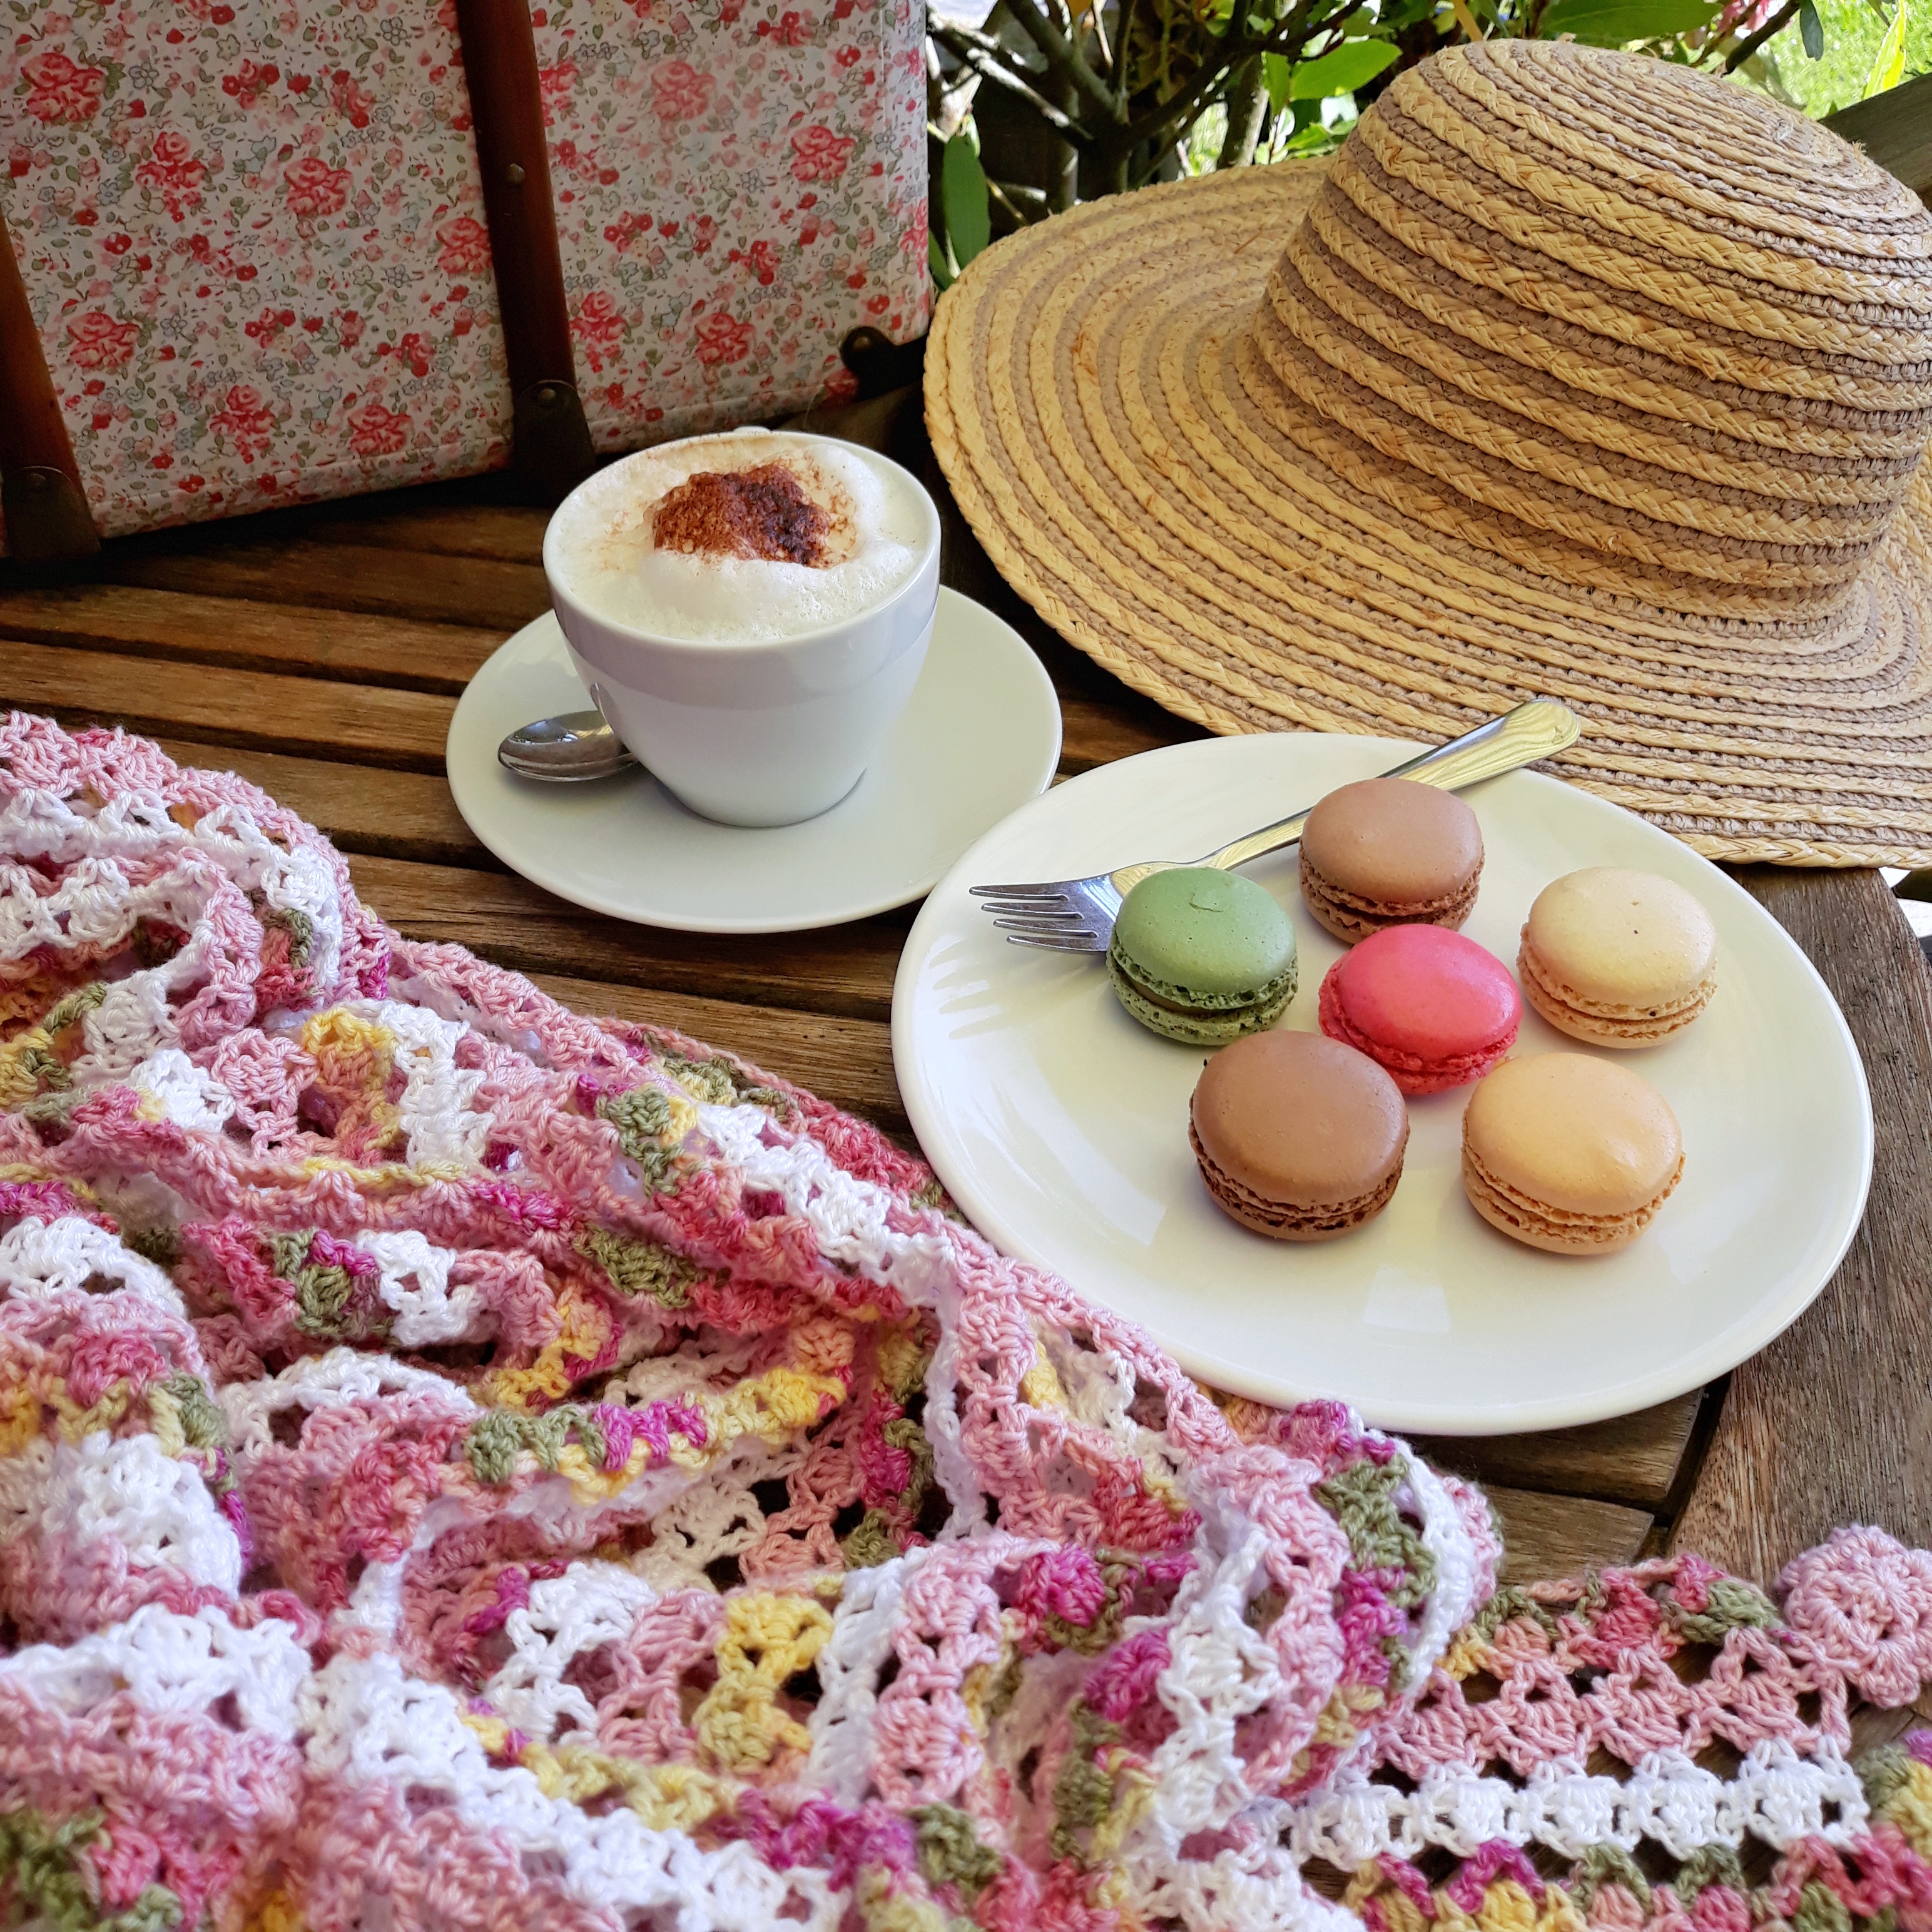 crocheted scarf in front of a plate with macarons and a cup with latte